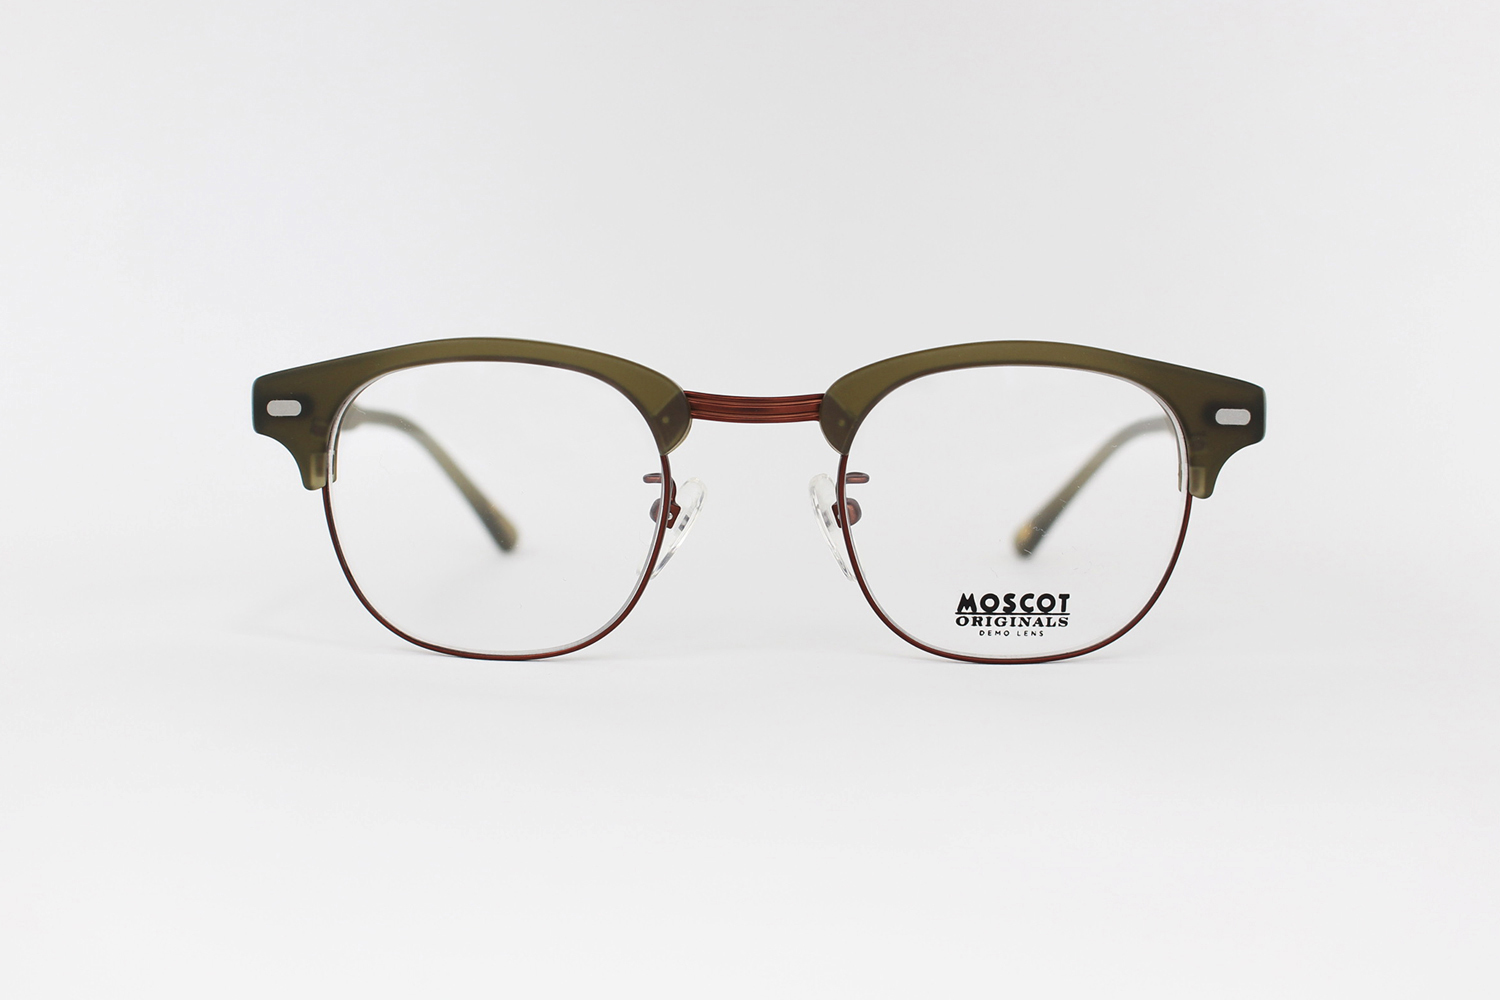 MOSCOT×TODD SNYDERYUKEL 46 | The PARKSIDE ROOM 吉祥寺｜メガネの 